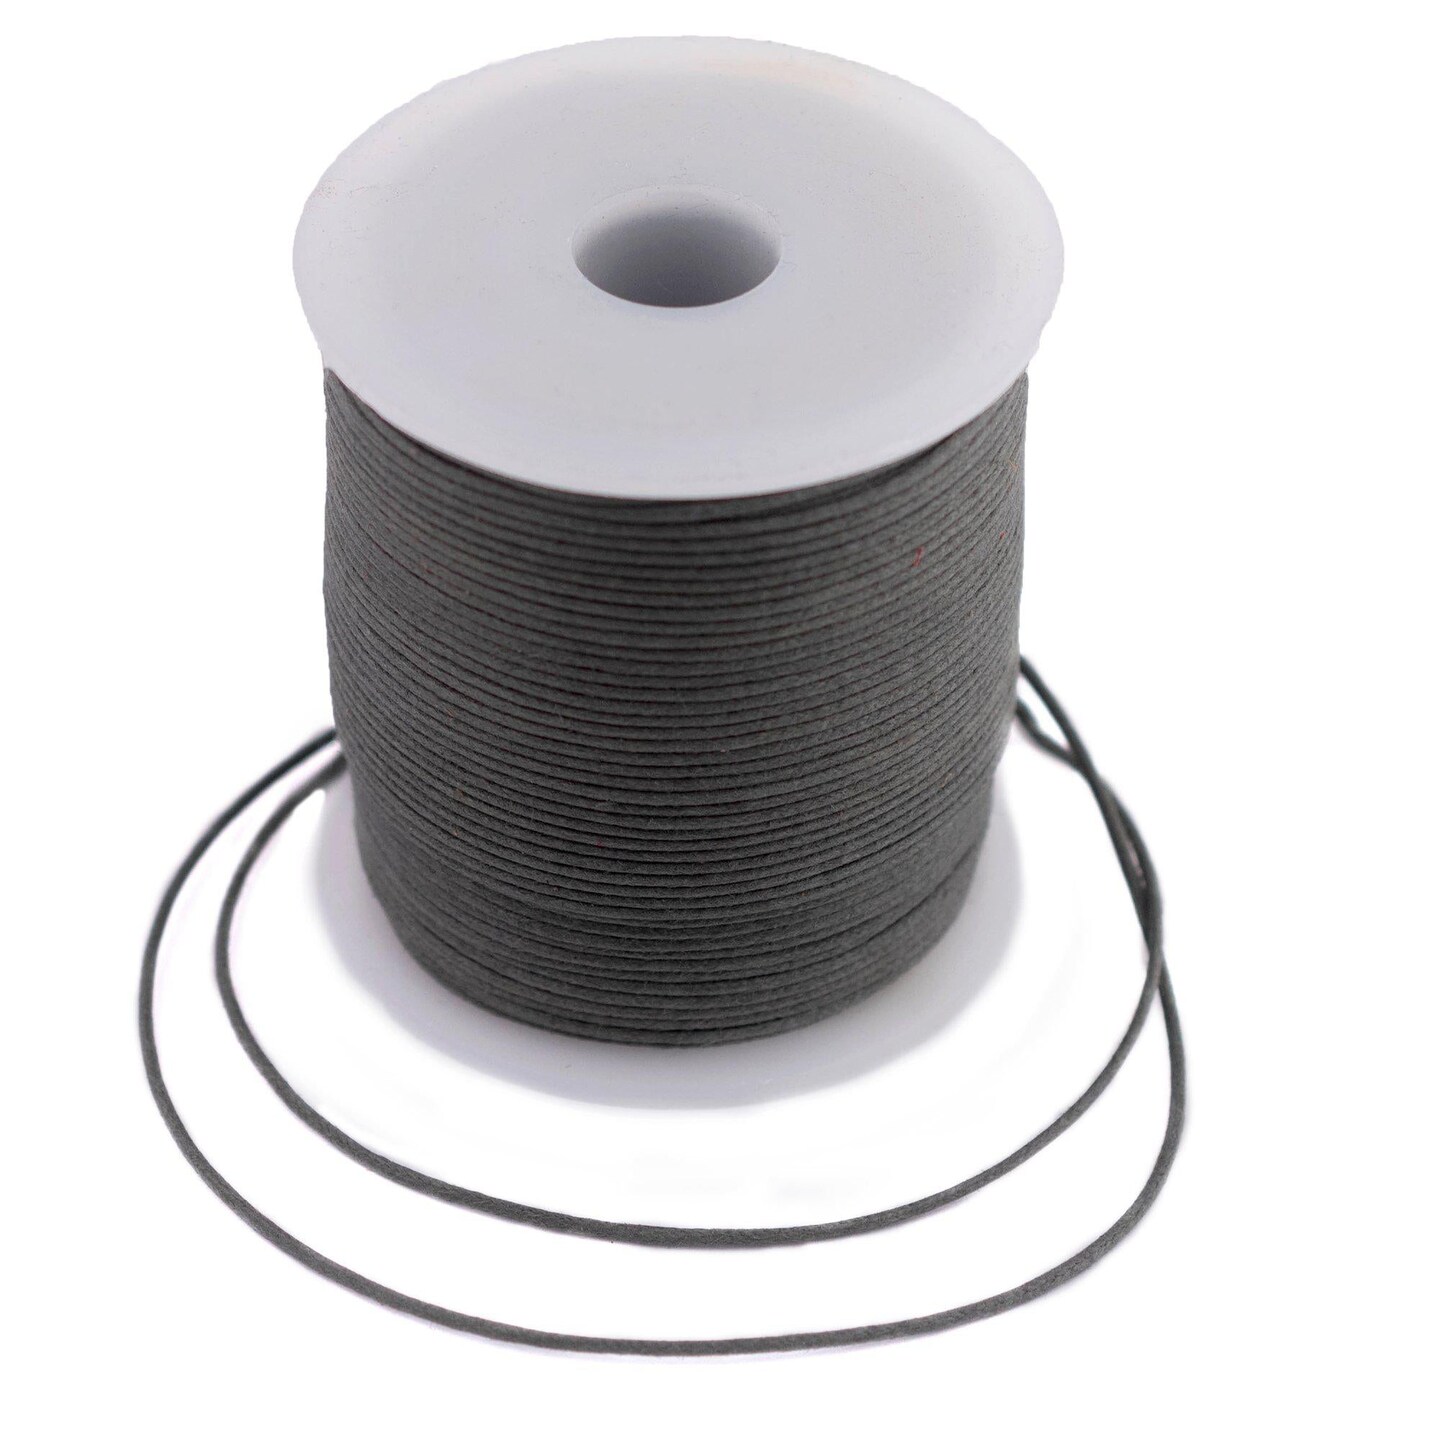 TheBeadChest 1.0mm Dark Grey Waxed Cotton Cord (300ft)